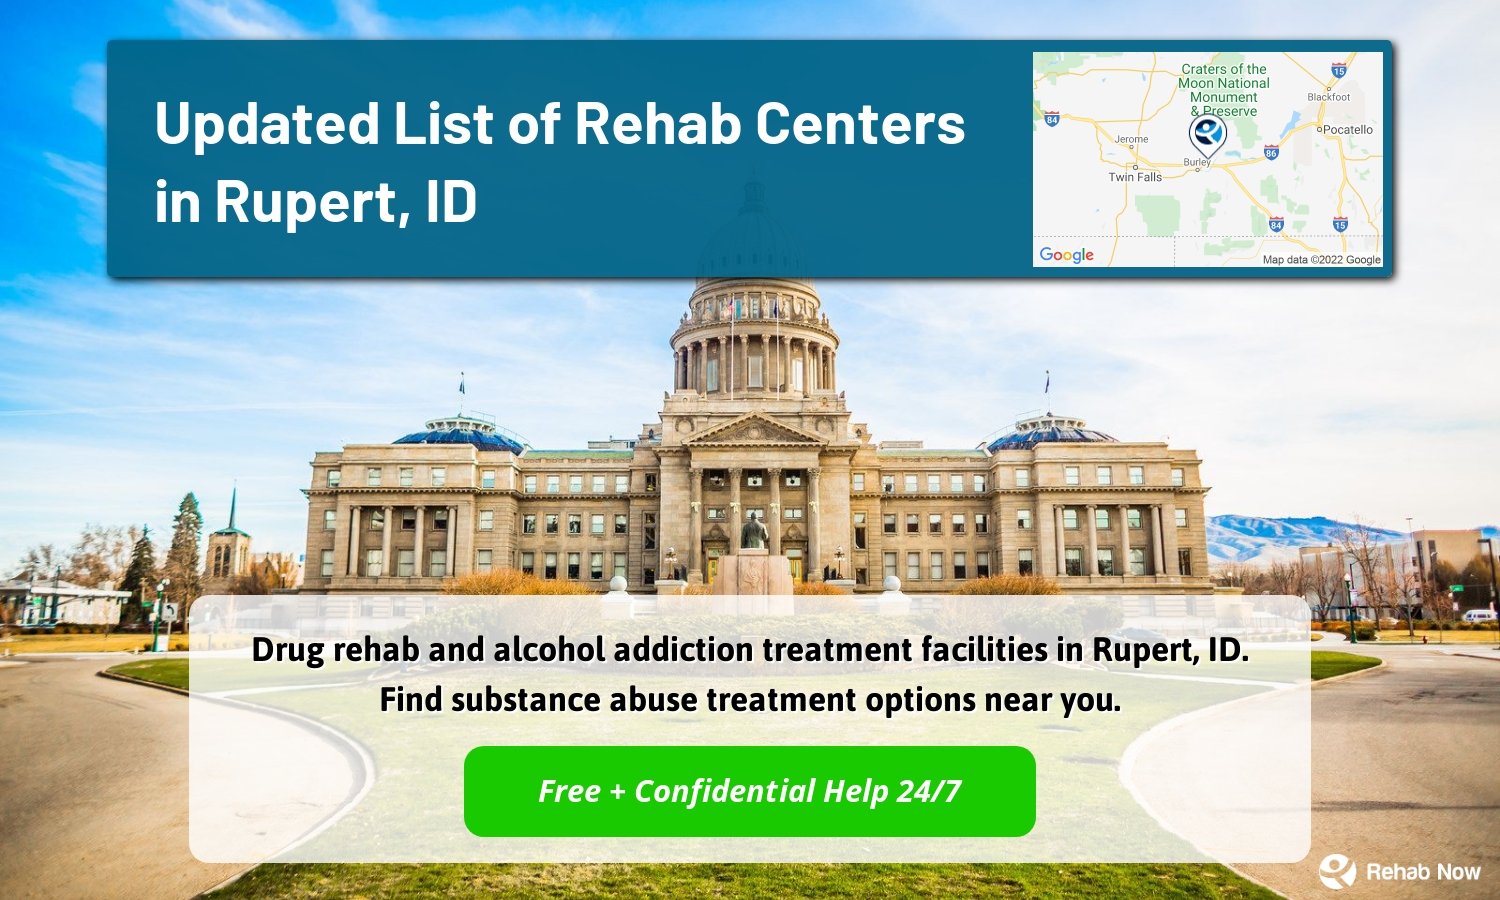 Drug rehab and alcohol addiction treatment facilities in Rupert, ID. Find substance abuse treatment options near you.